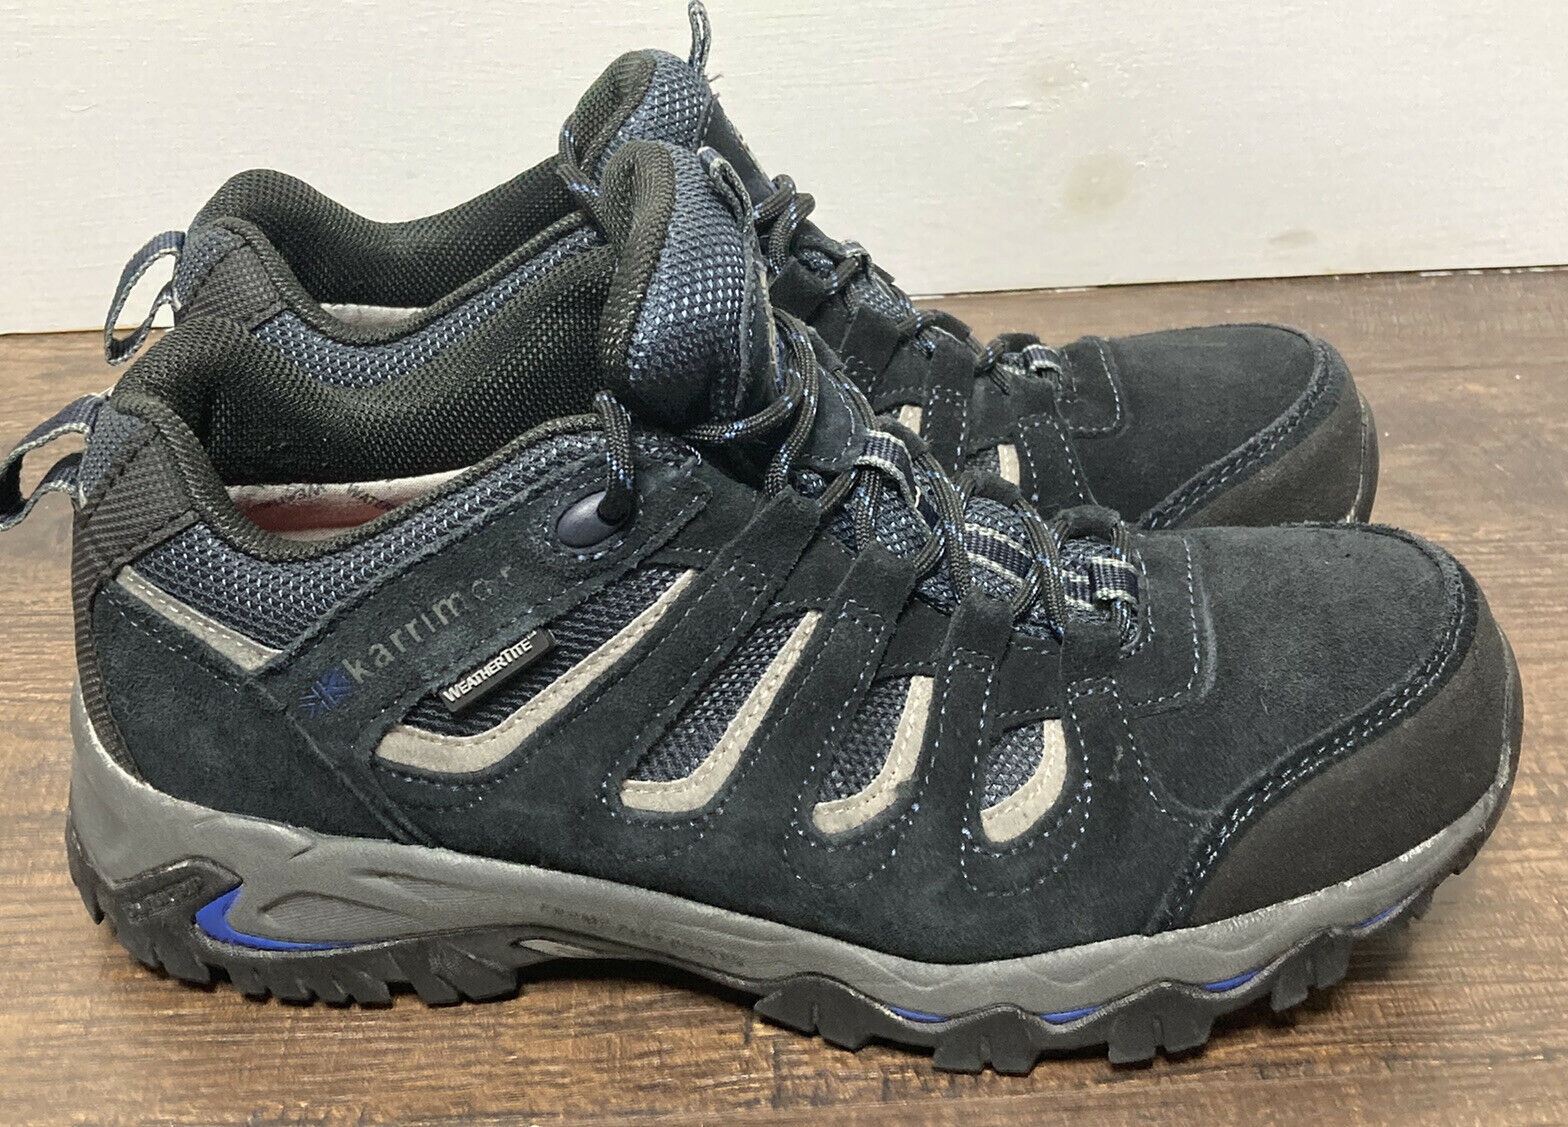 Karrimor Mens “Mount Low 7” Lace Up Walking Shoes Hiking Sneakers Navy Size 10